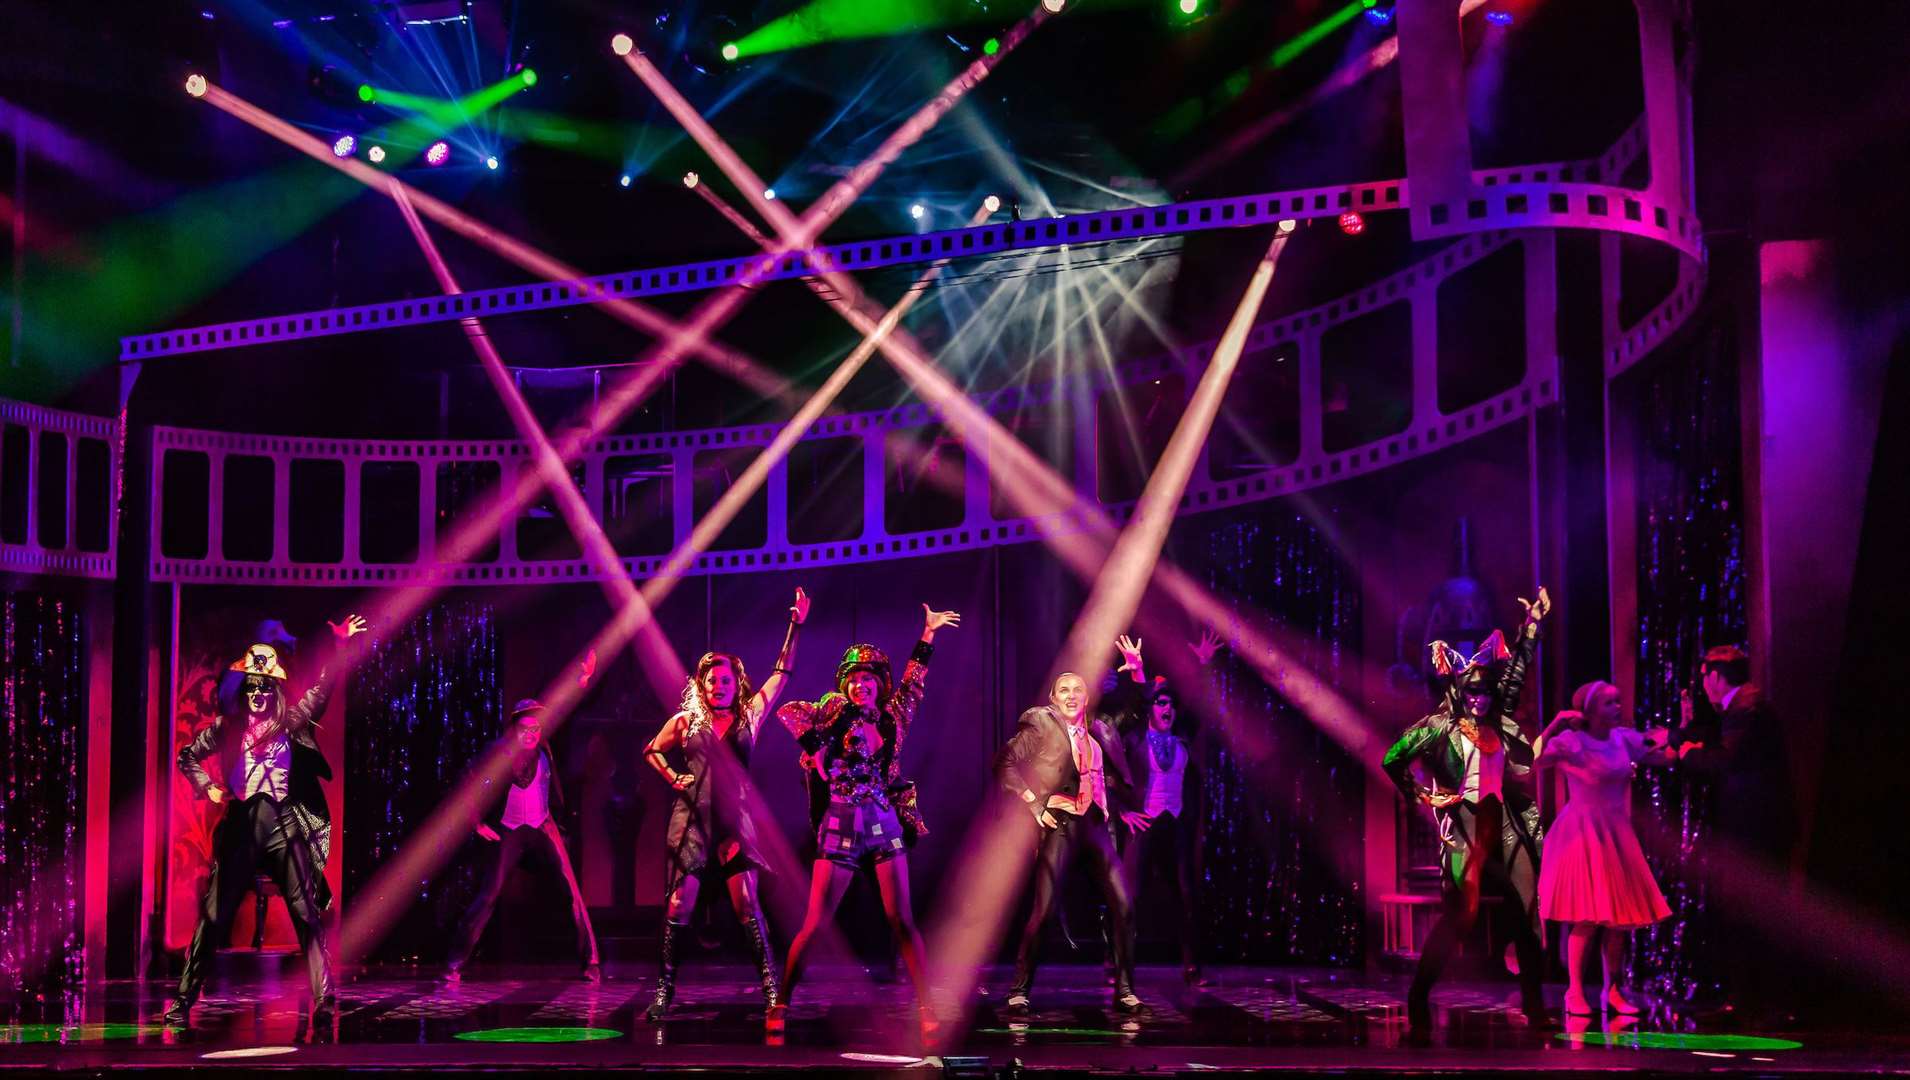 Win tickets to the Rocky Horror Show, coming to the Orchard Theatre in January 2023. Picture: Supplied by the Orchard Theatre